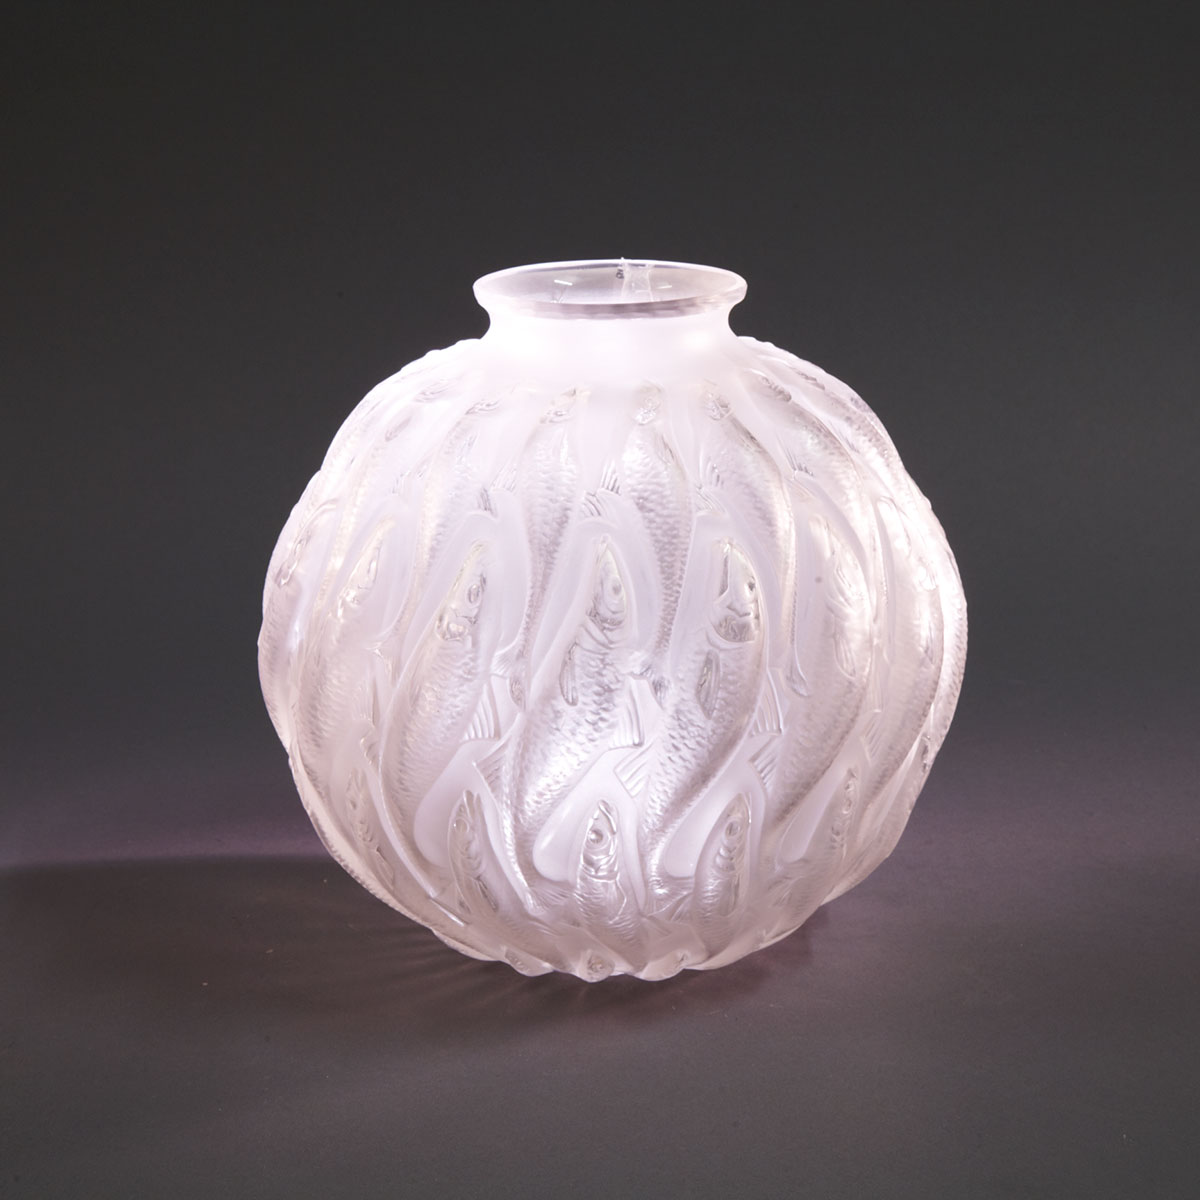  Marisa T Lalique Moulded and 1777e3